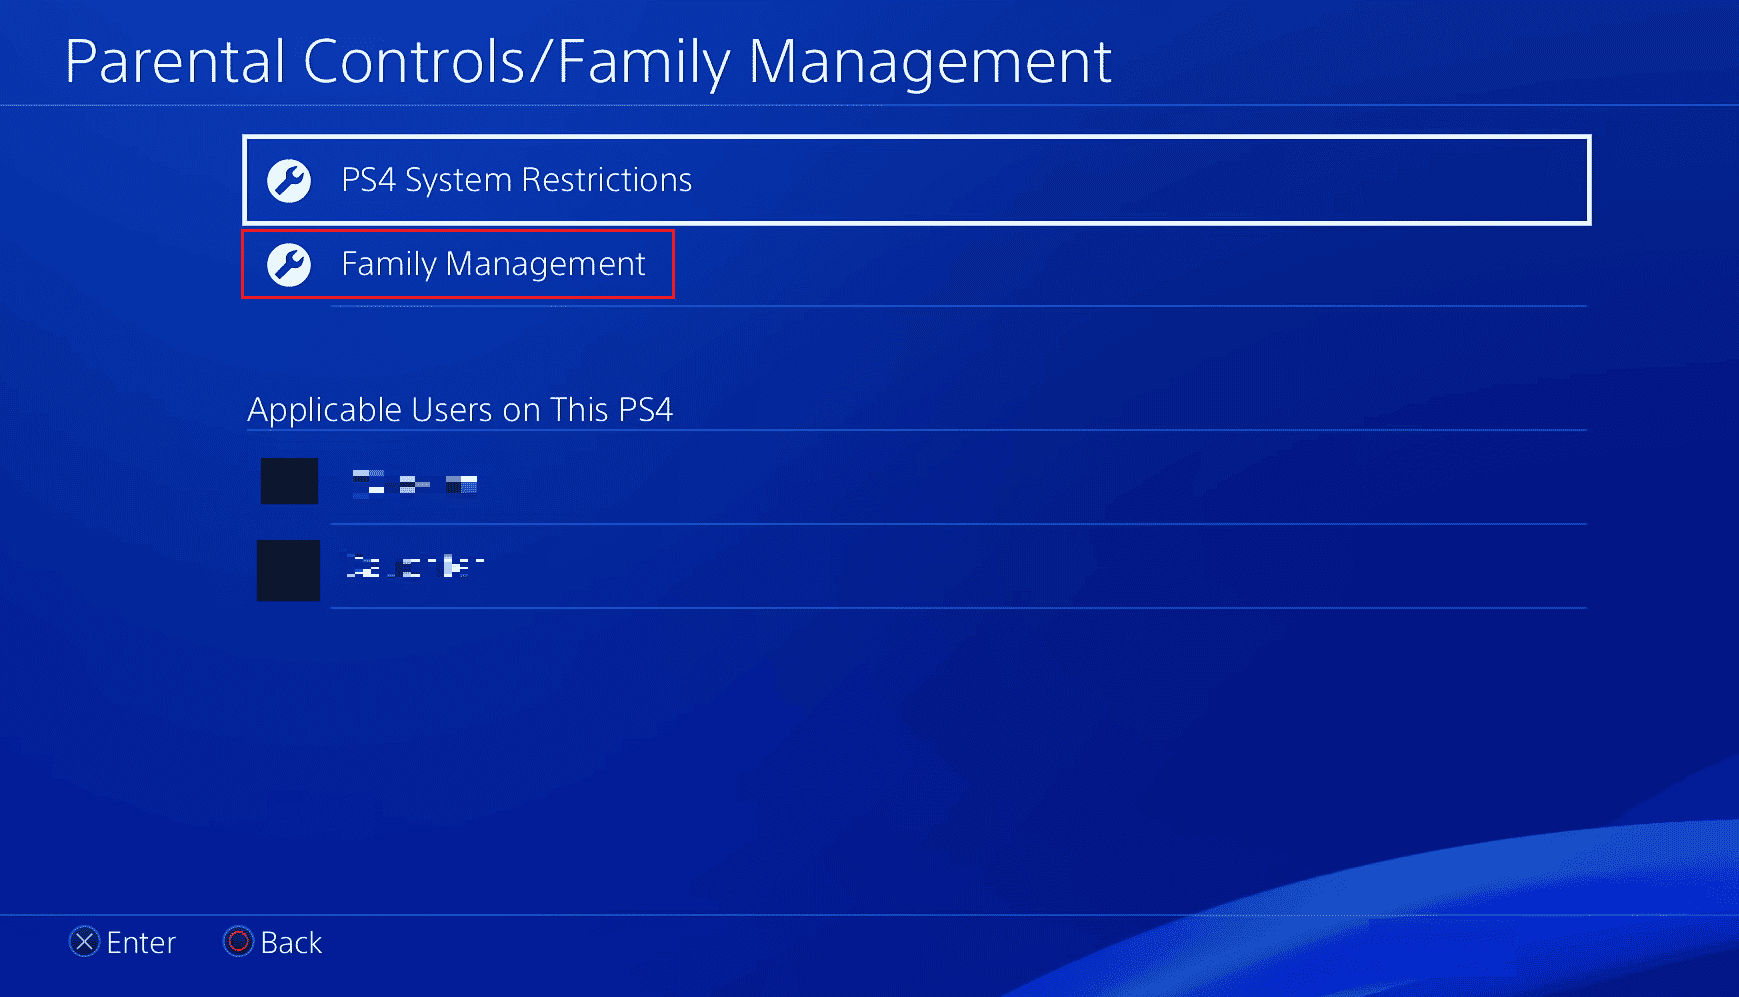 Select Family Management to set up a family | change your child's account to a parent account on PS4